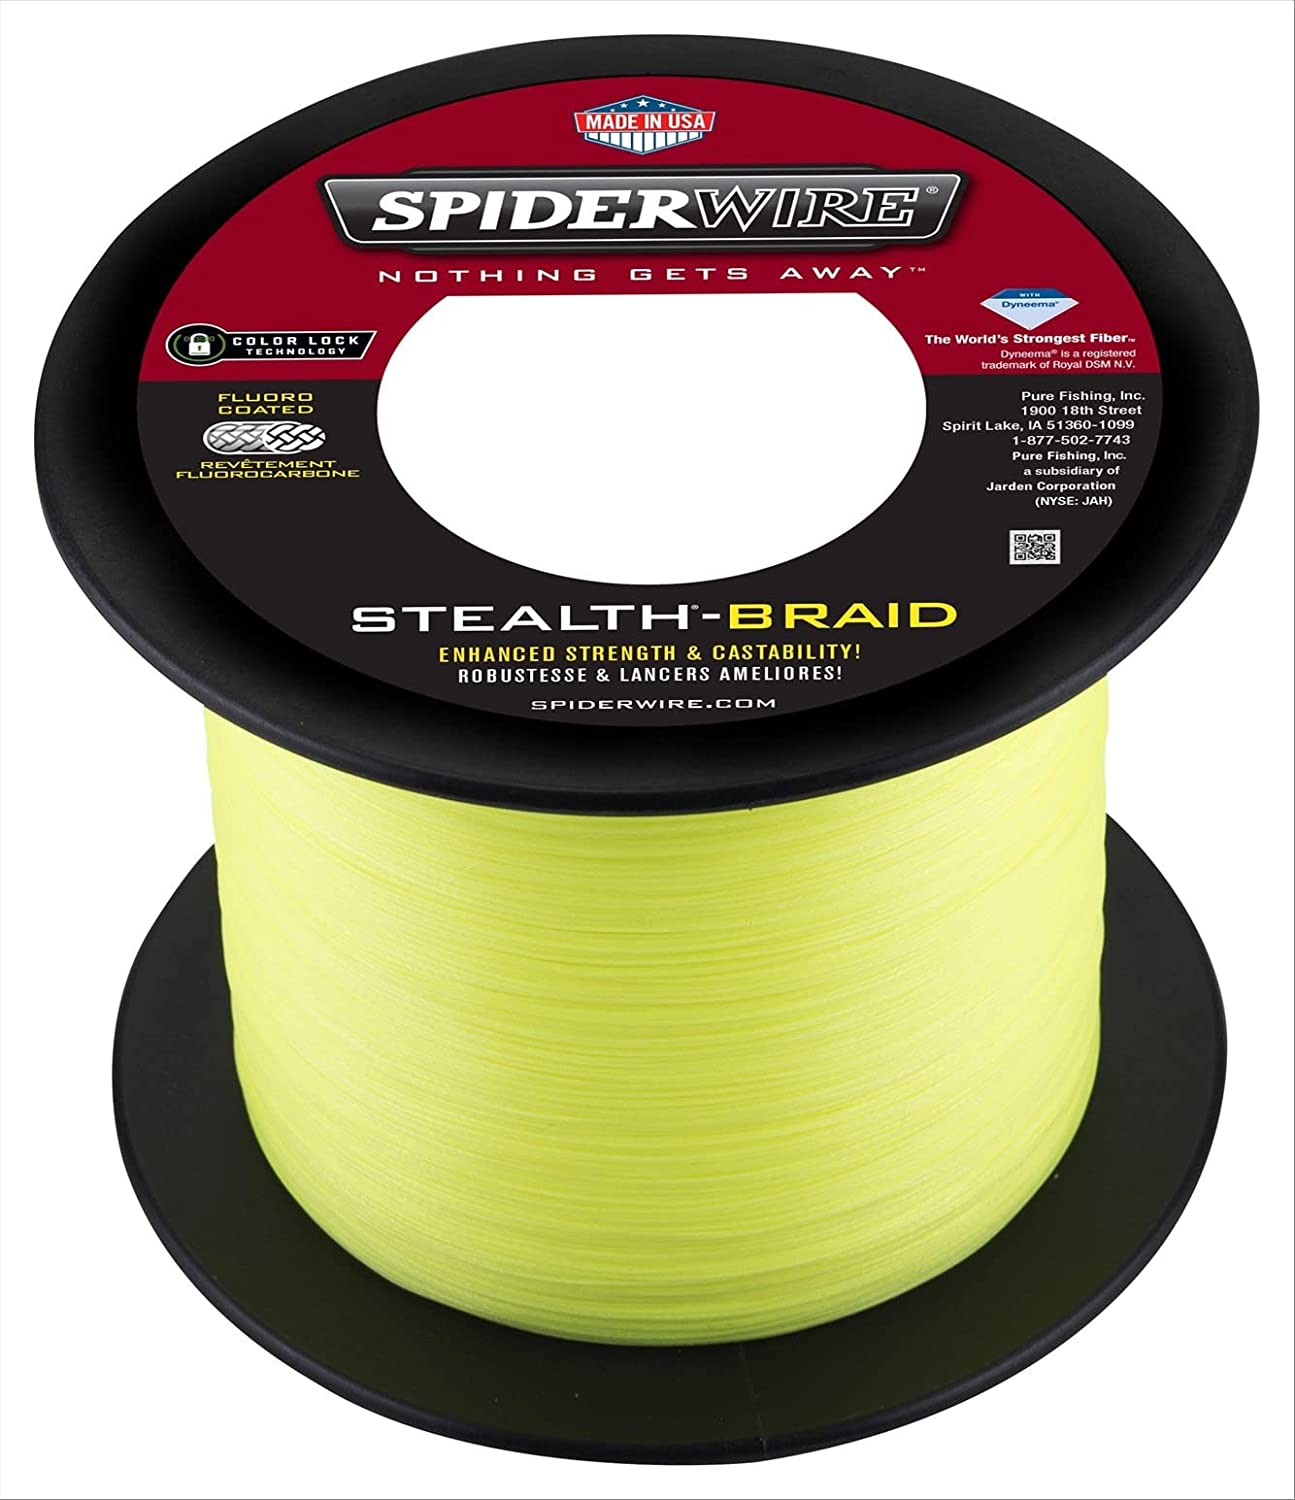 Spiderwire Ultracast Invisi-Braid Smooth Fishing Line – 300yds Sea Fishing